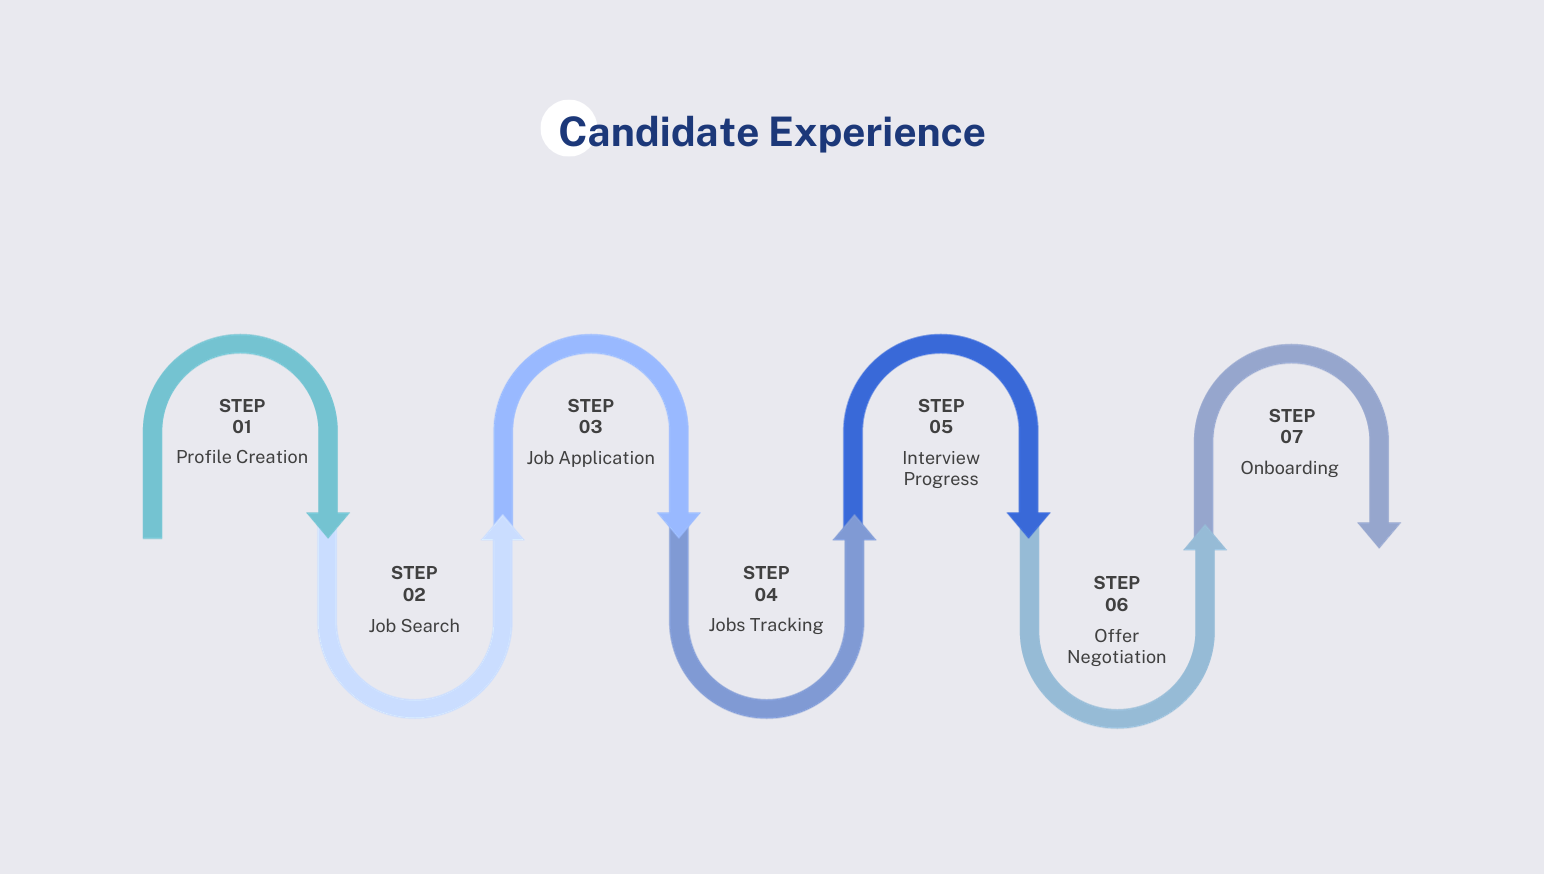 Analyzing the Candidate's Experience